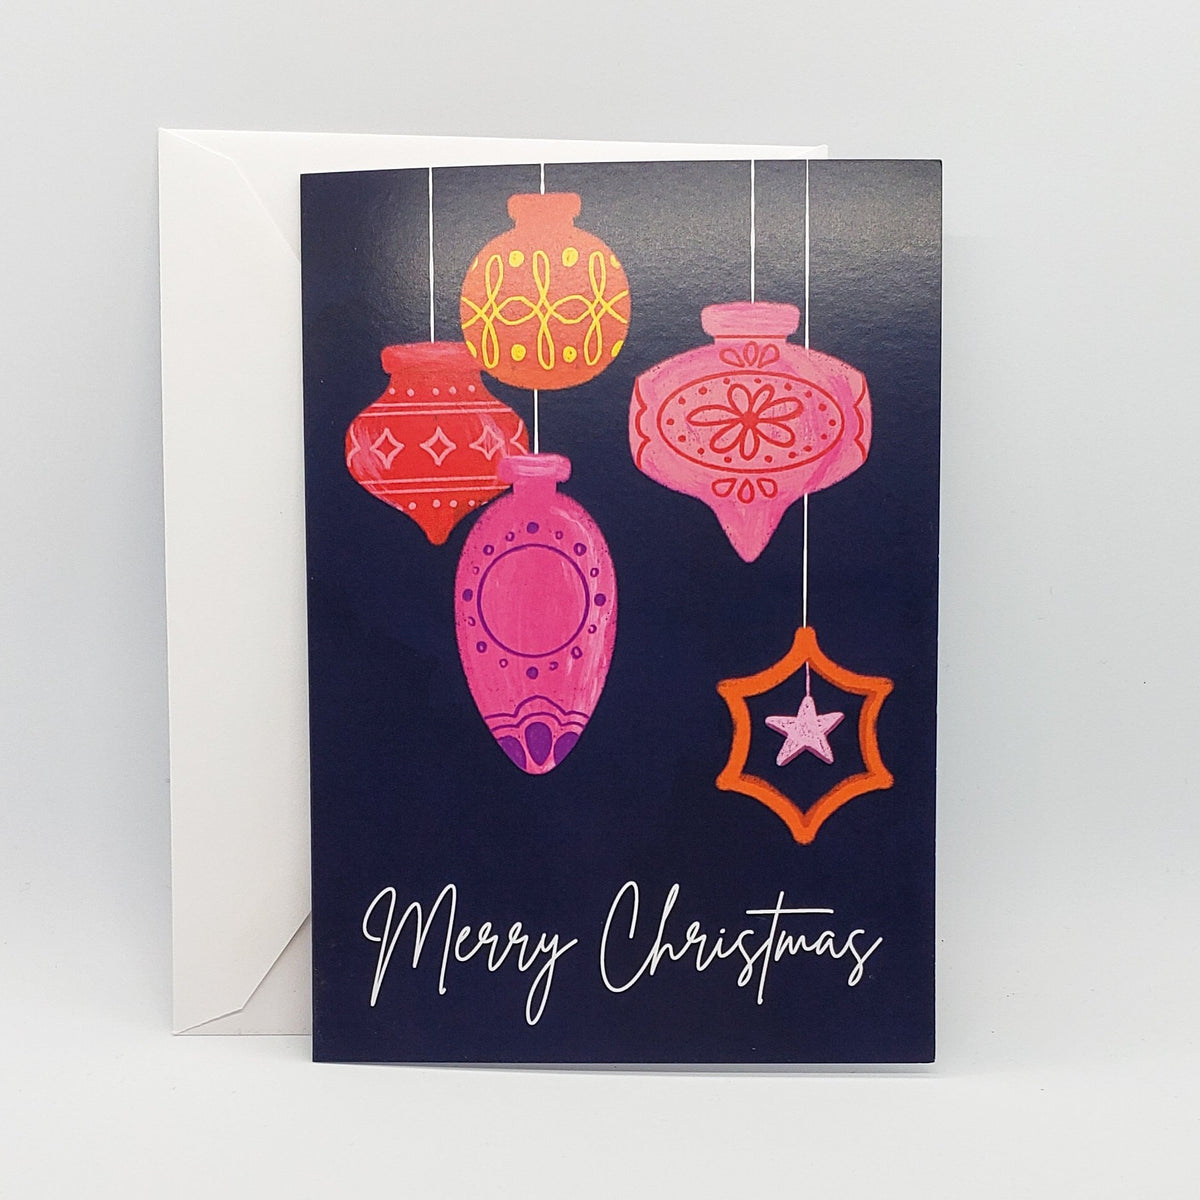 Merry Christmas Illustrated Greeting Card